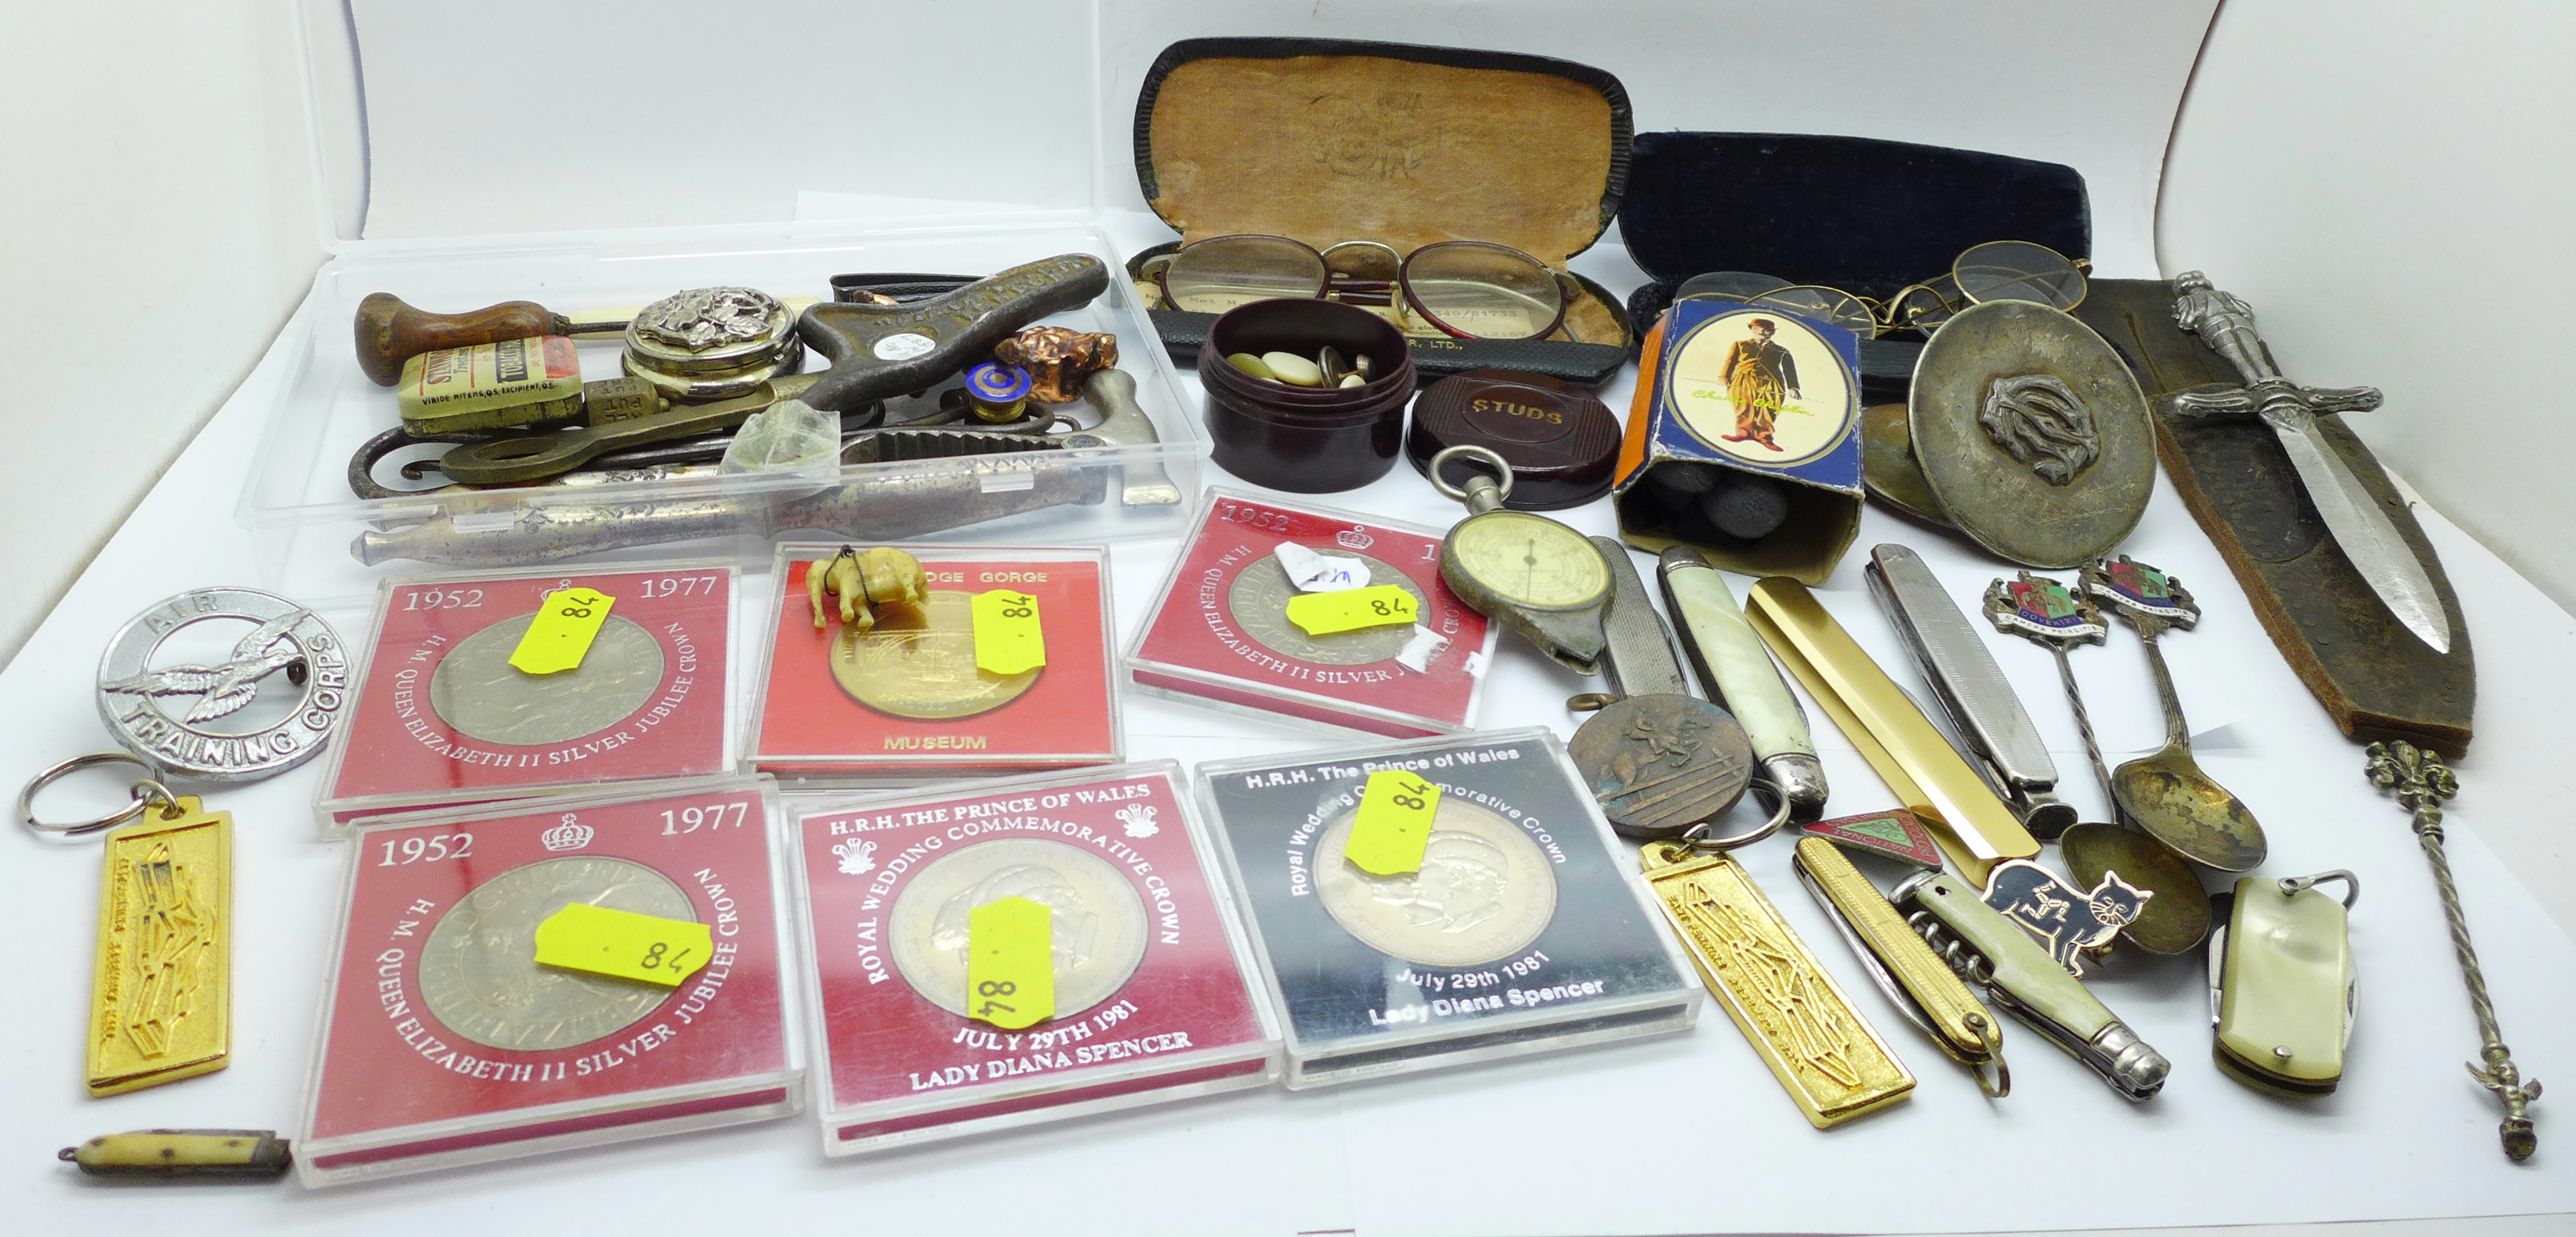 Three pairs of spectacles, penknives, commemorative crowns, souvenir spoons, etc.